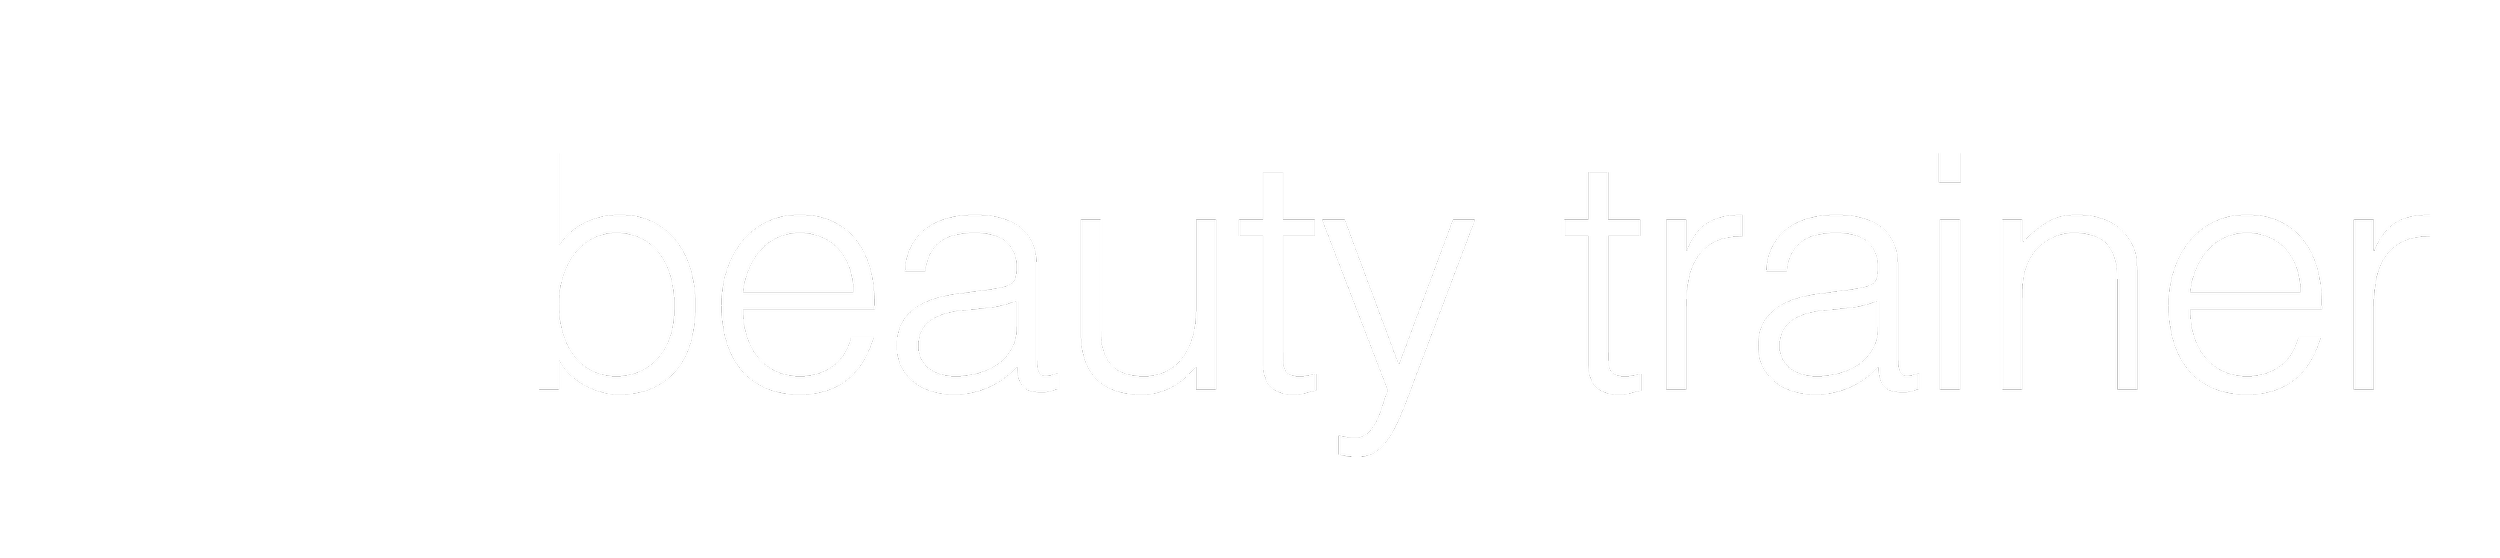 Beauty Trainer by Everyoung